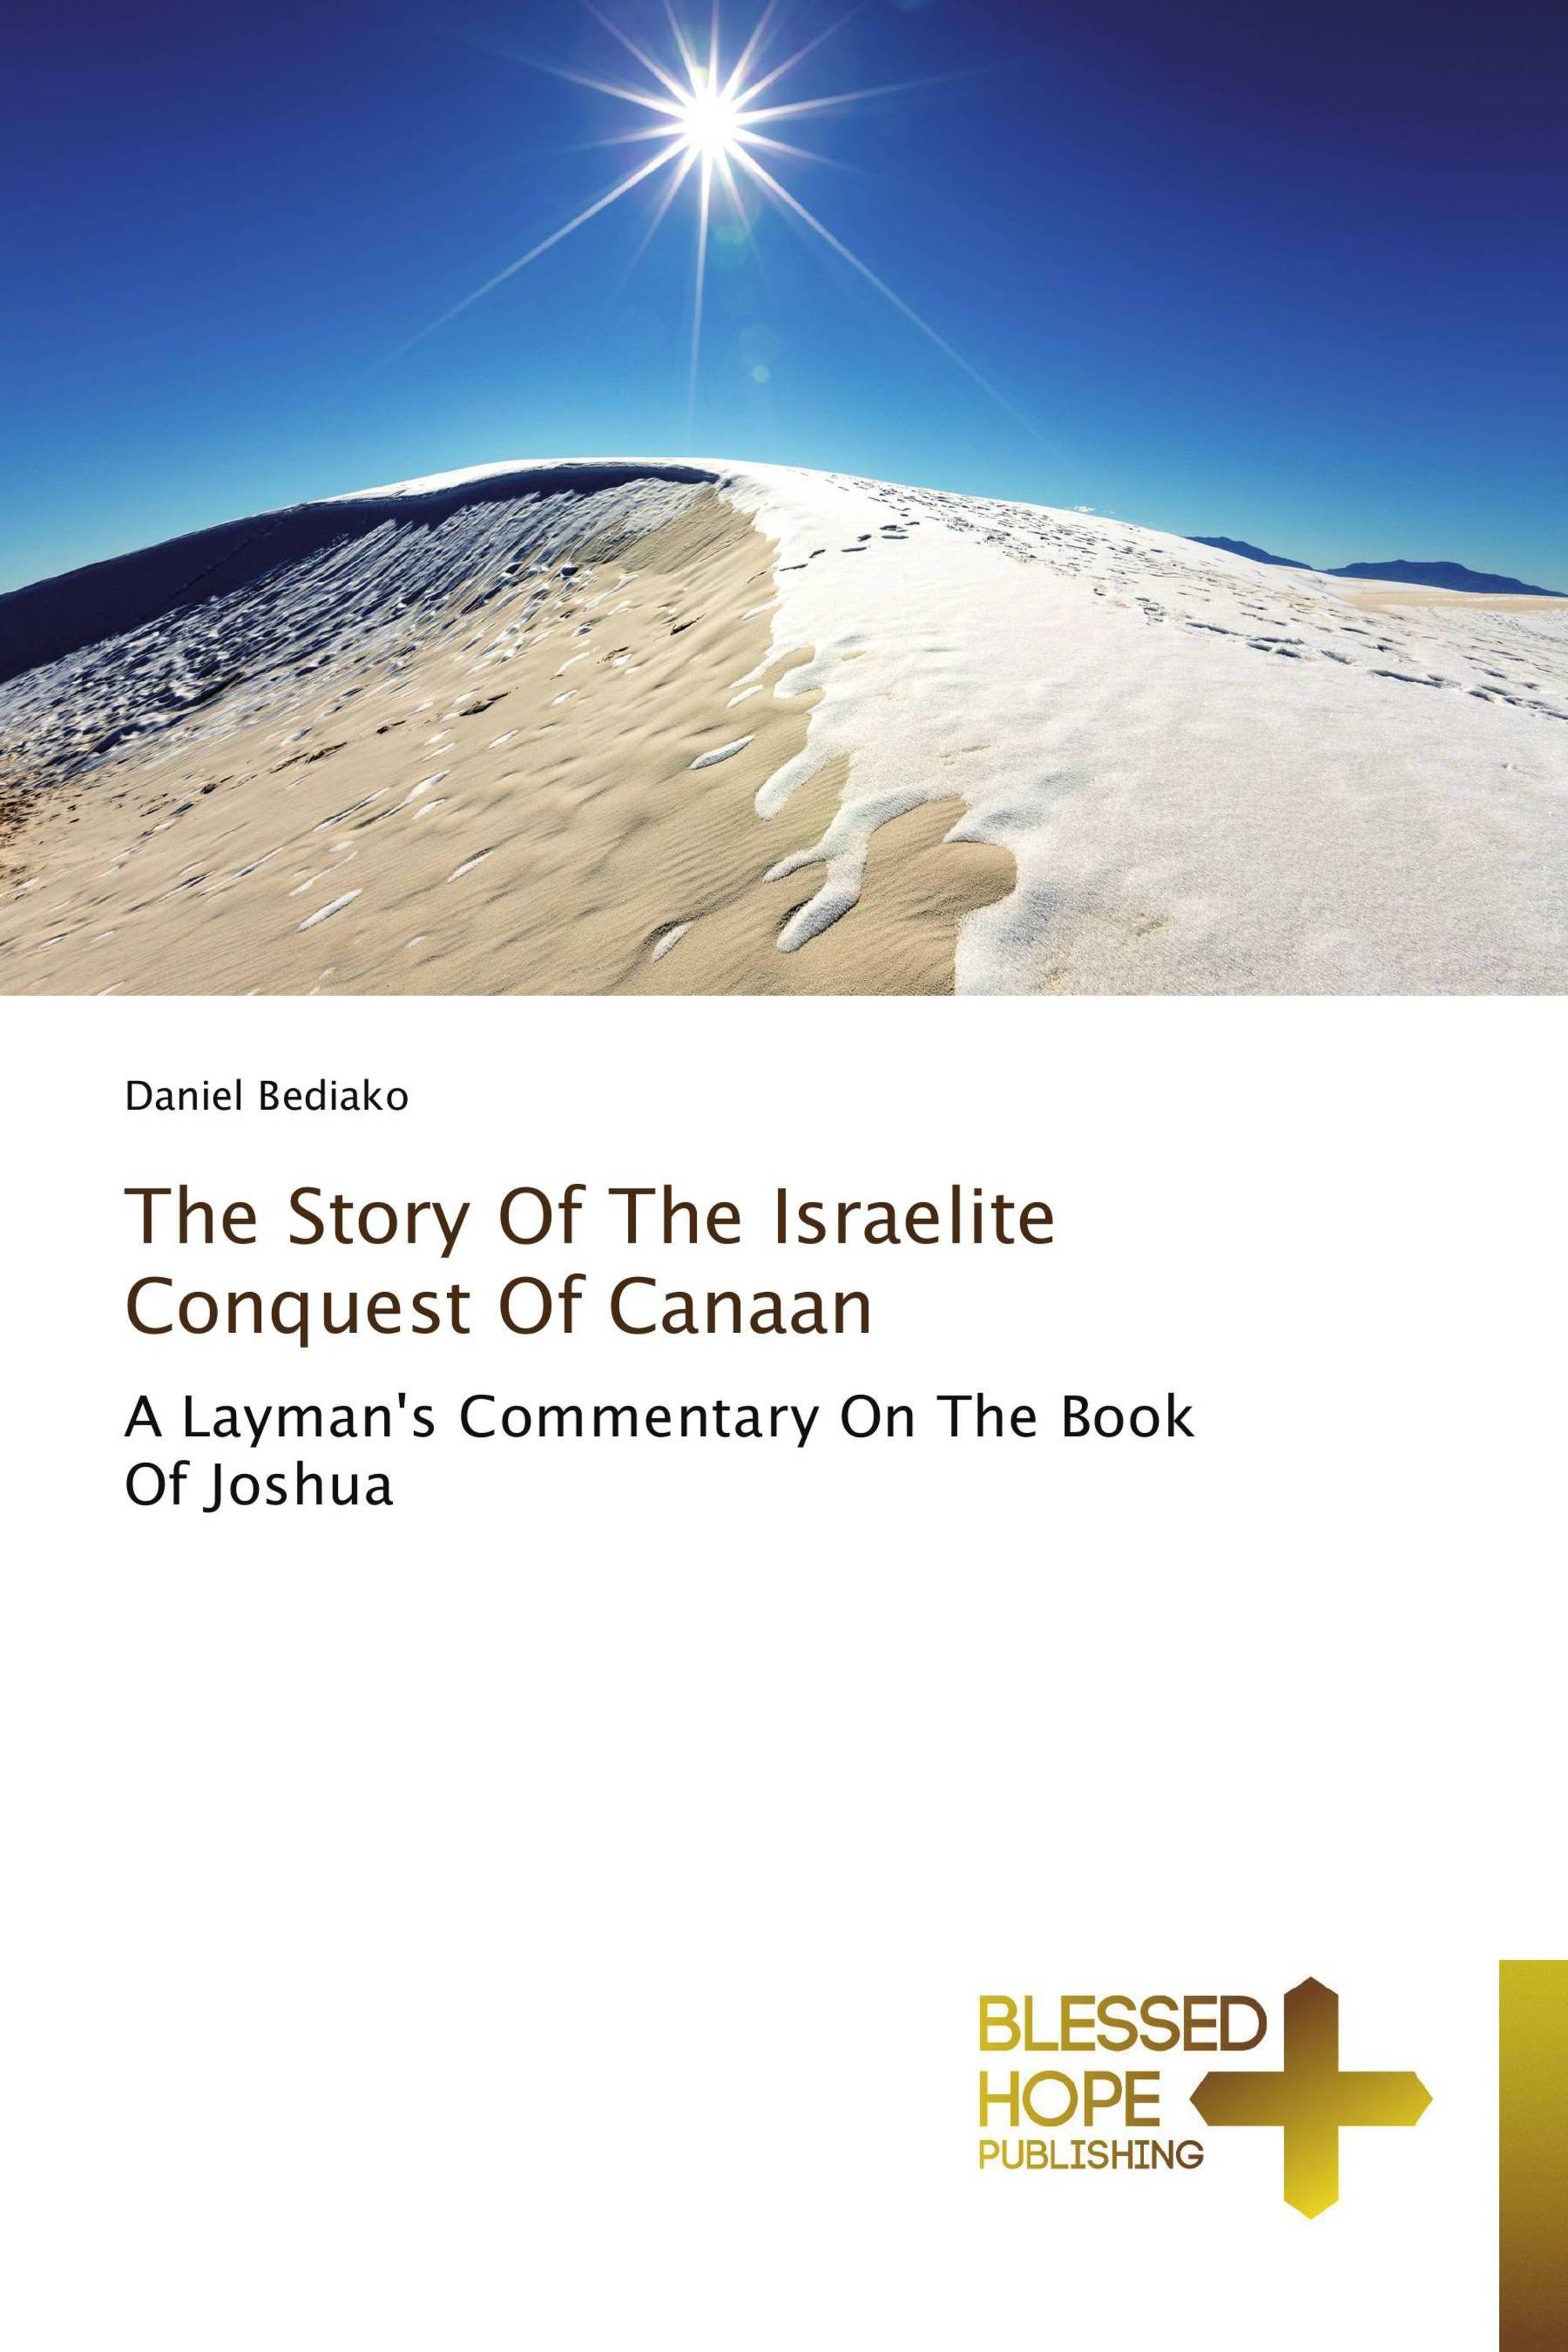 The Story Of The Israelite Conquest Of Canaan